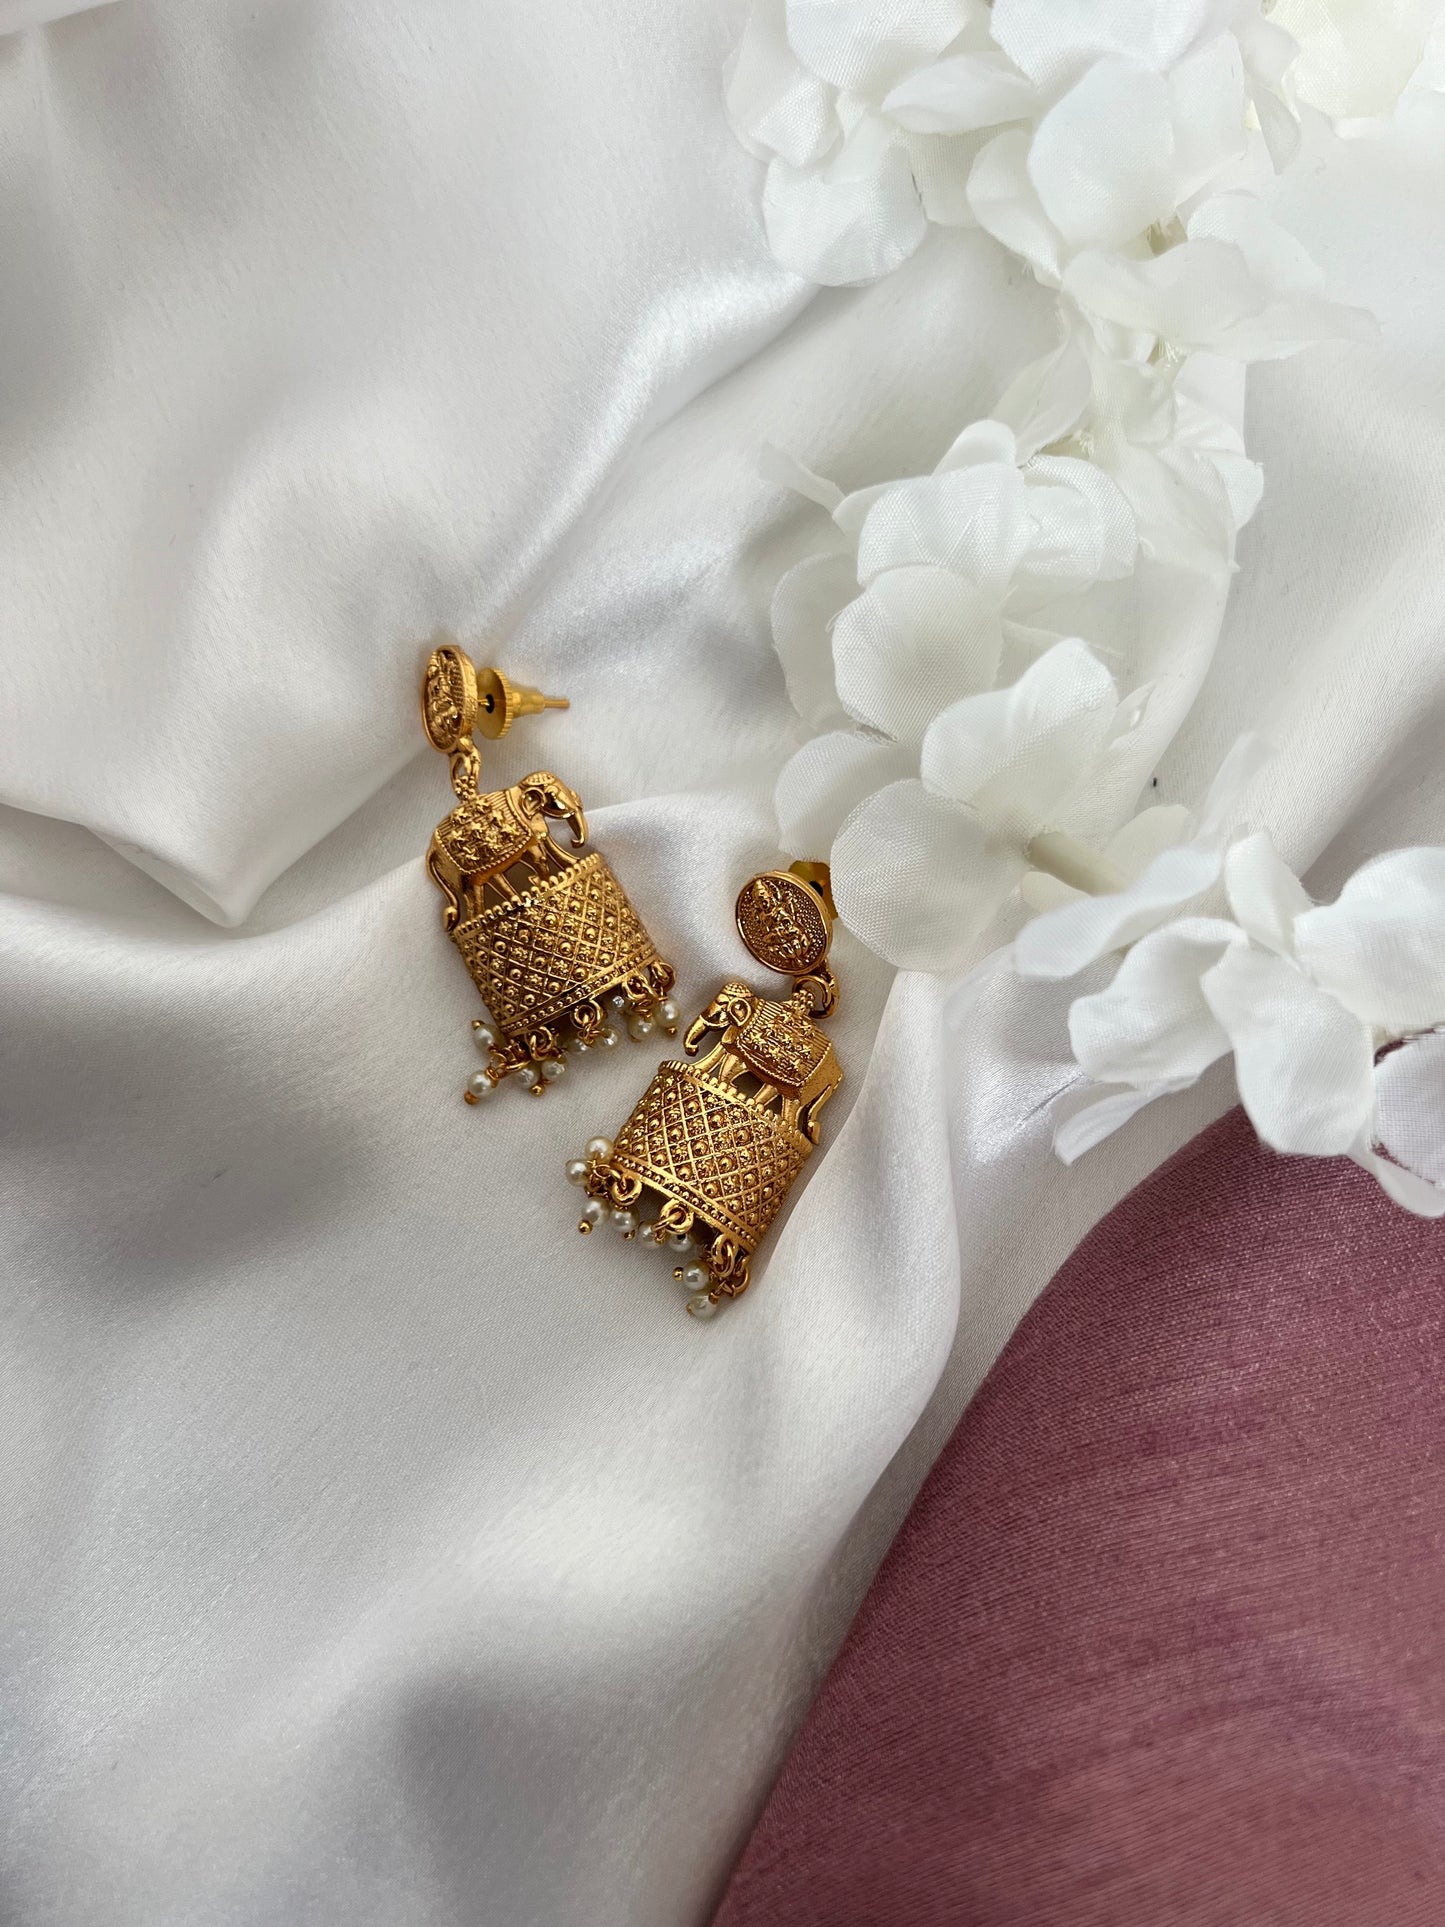 Antique elephant temple earrings with gold plating and hanging small white pearls E3005